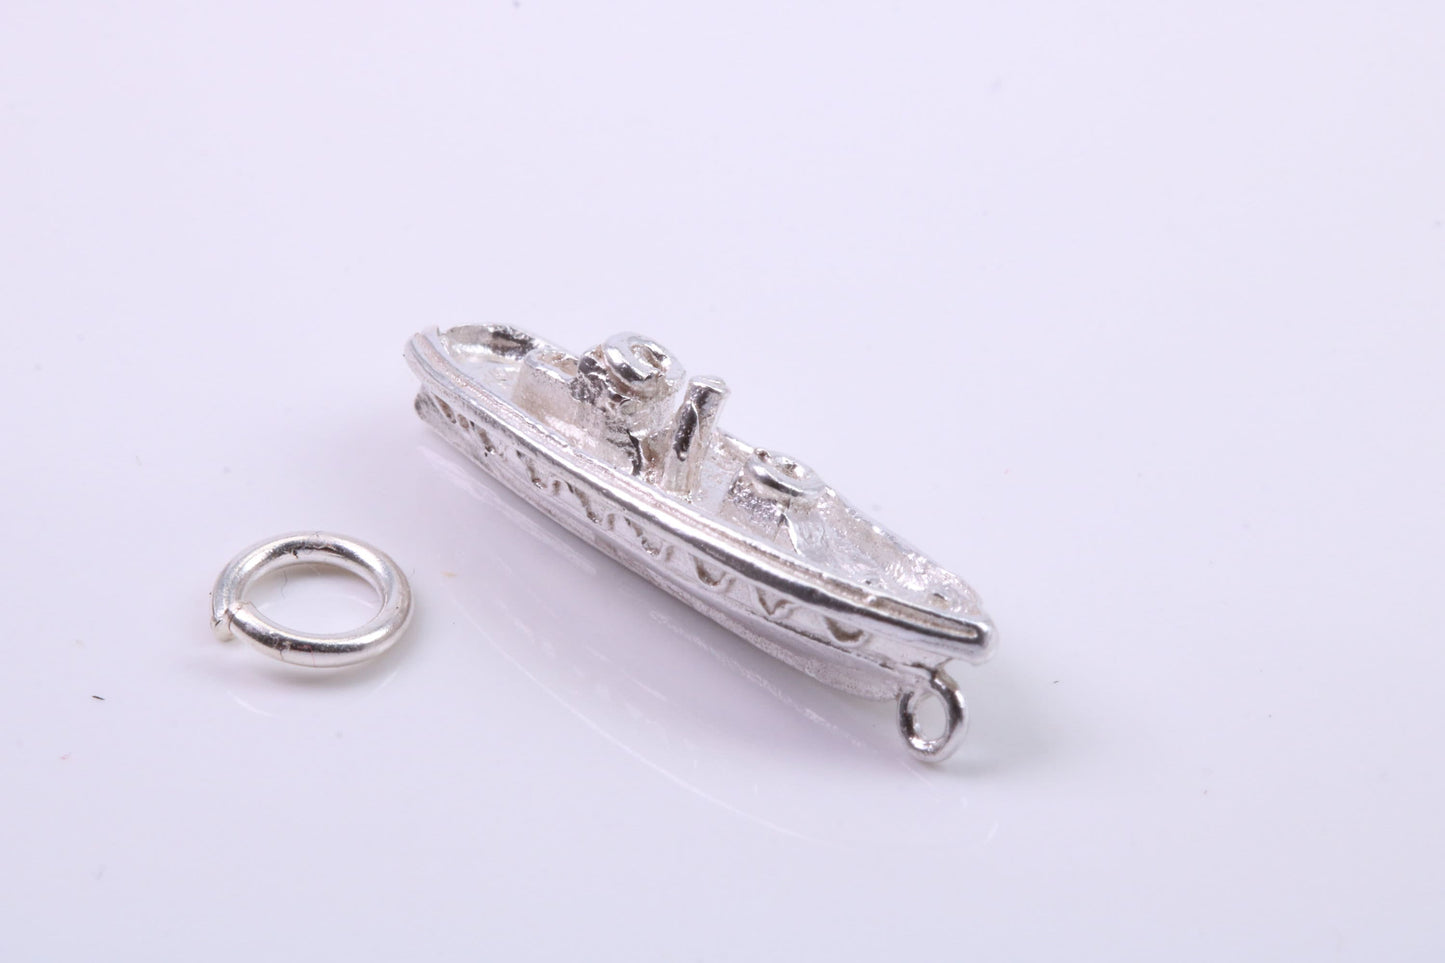 Speed Boat Charm, Traditional Charm, Made from Solid 925 Grade Sterling Silver, Complete with Attachment Link